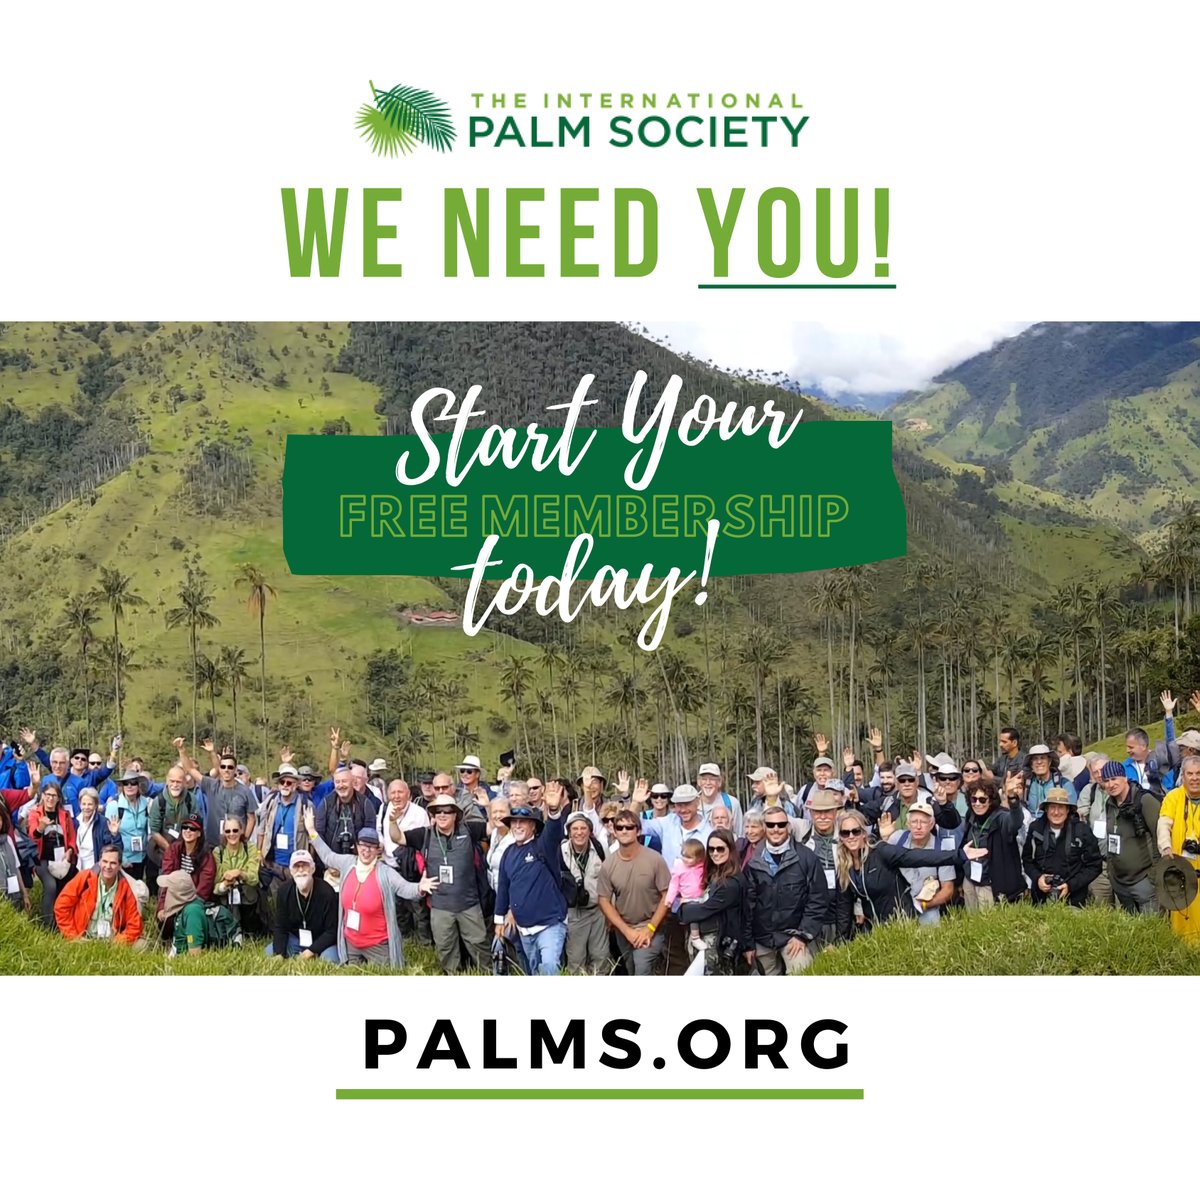 Thanks for celebrating International Palm Day with us! To learn more about what you can do to save palms, check out our website palms.org. For the latest news & to be a part of a global force for palm conservation, join us (memberships start at US$0).